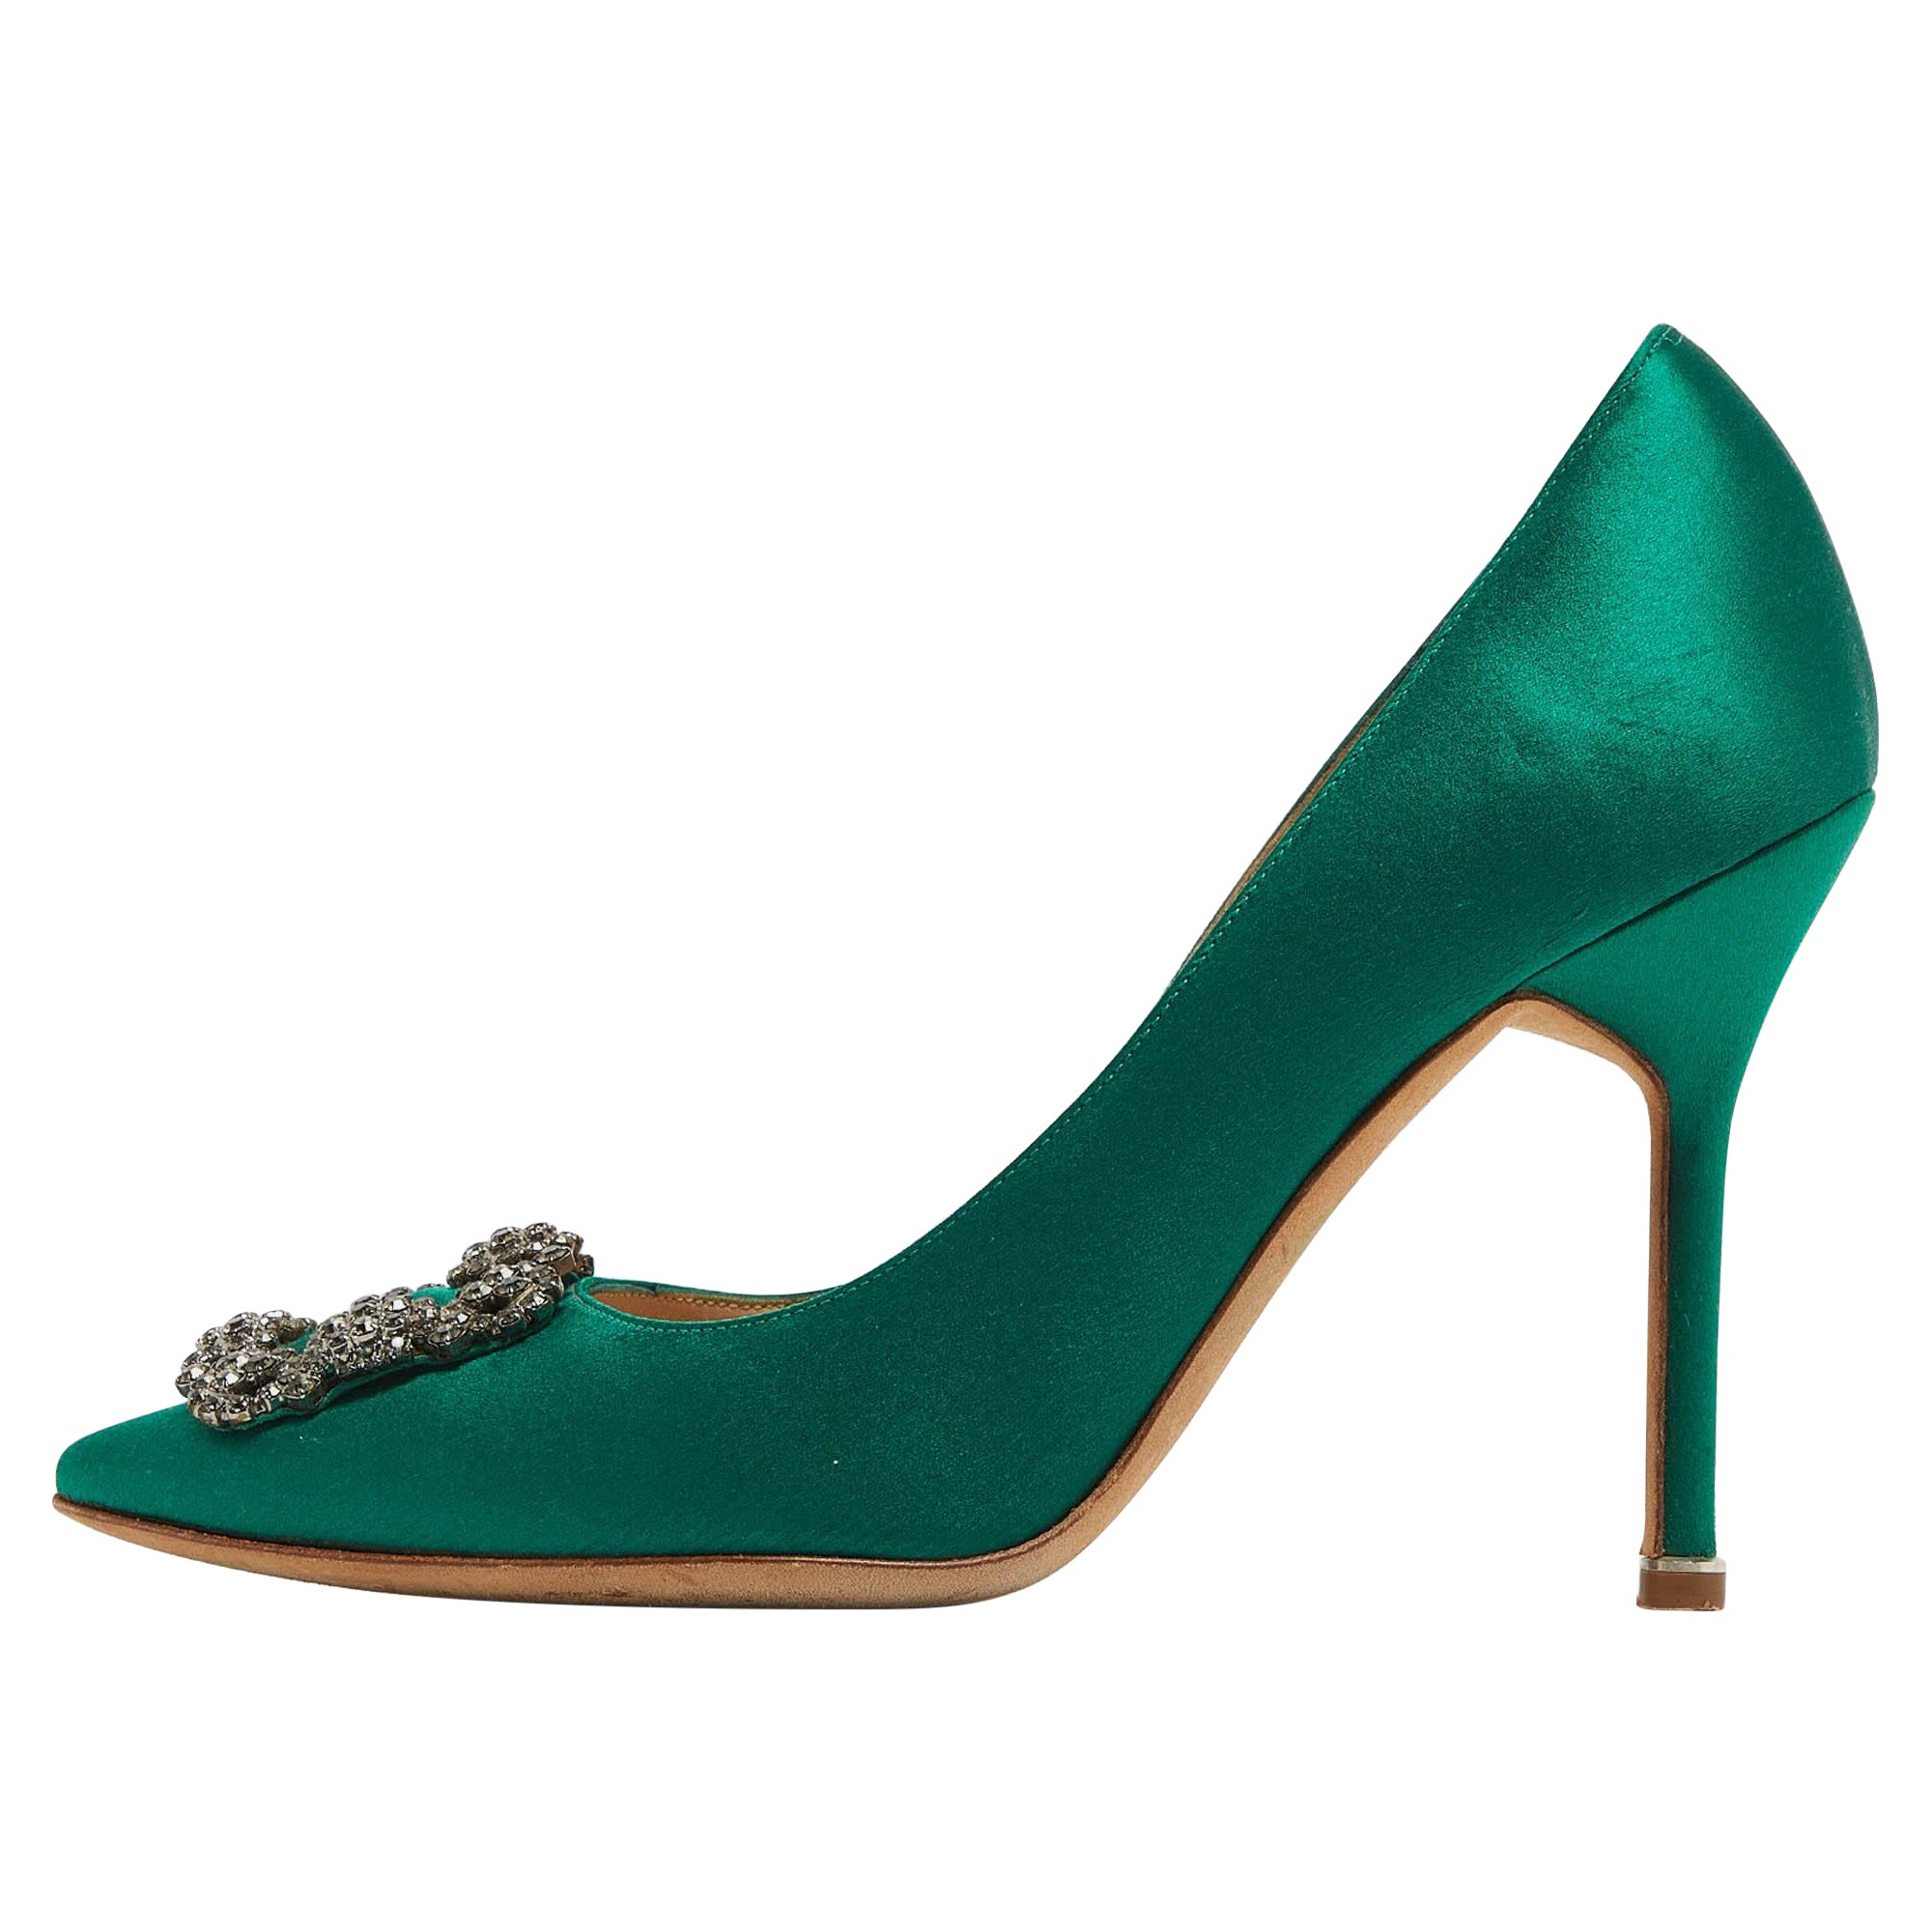 Who owns Manolo Blahnik shoes?